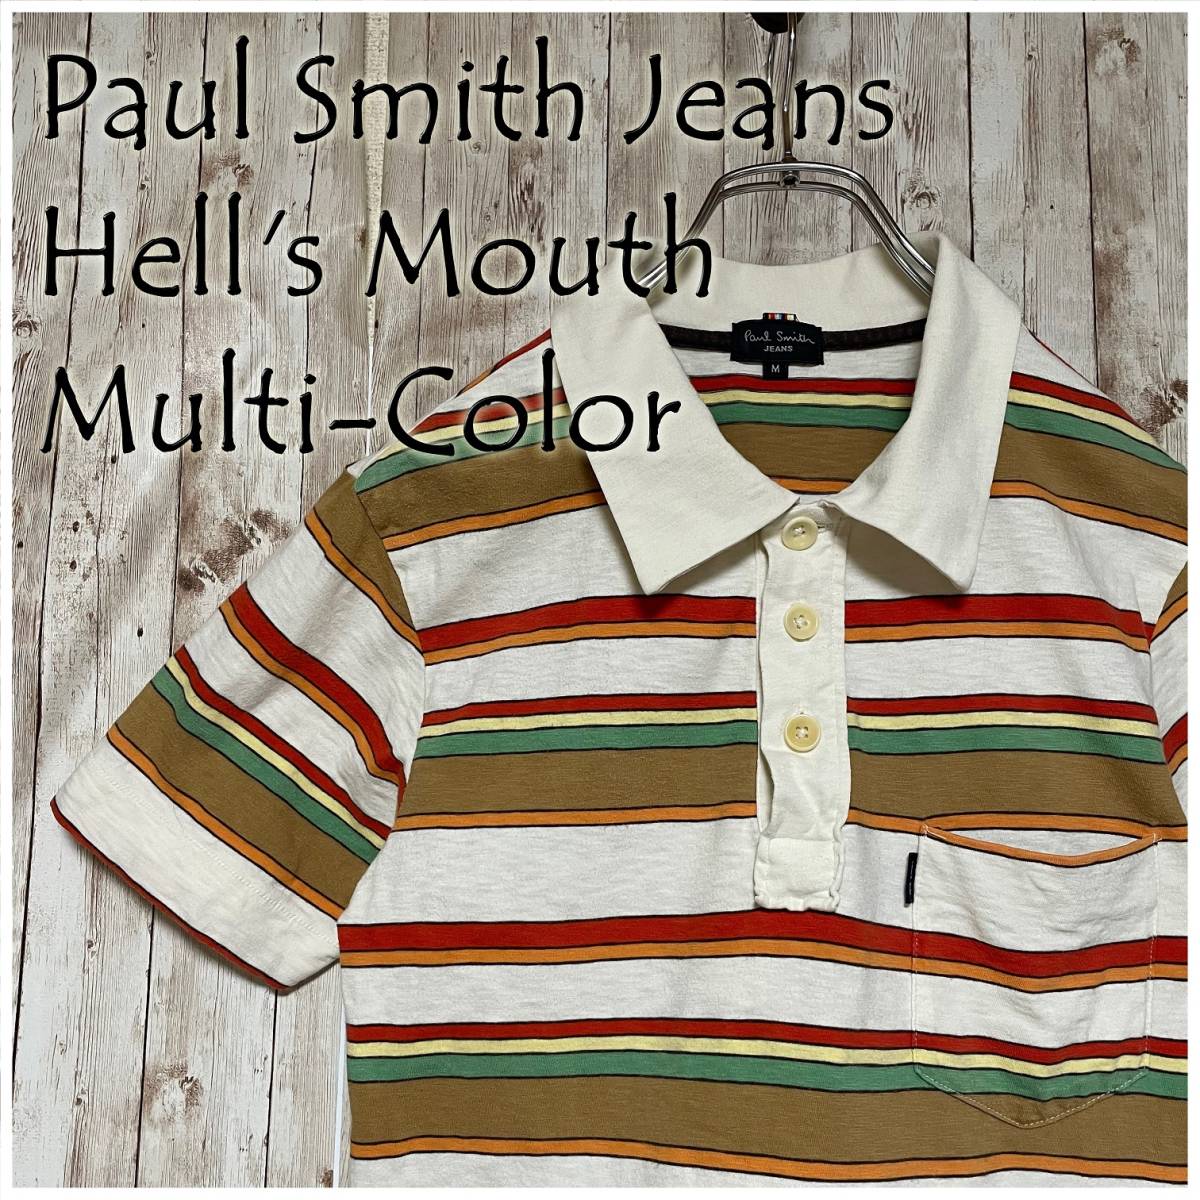 ☆Paul Smith Jeans Hell's Mouth シャツ マルチカラー ポールスミス